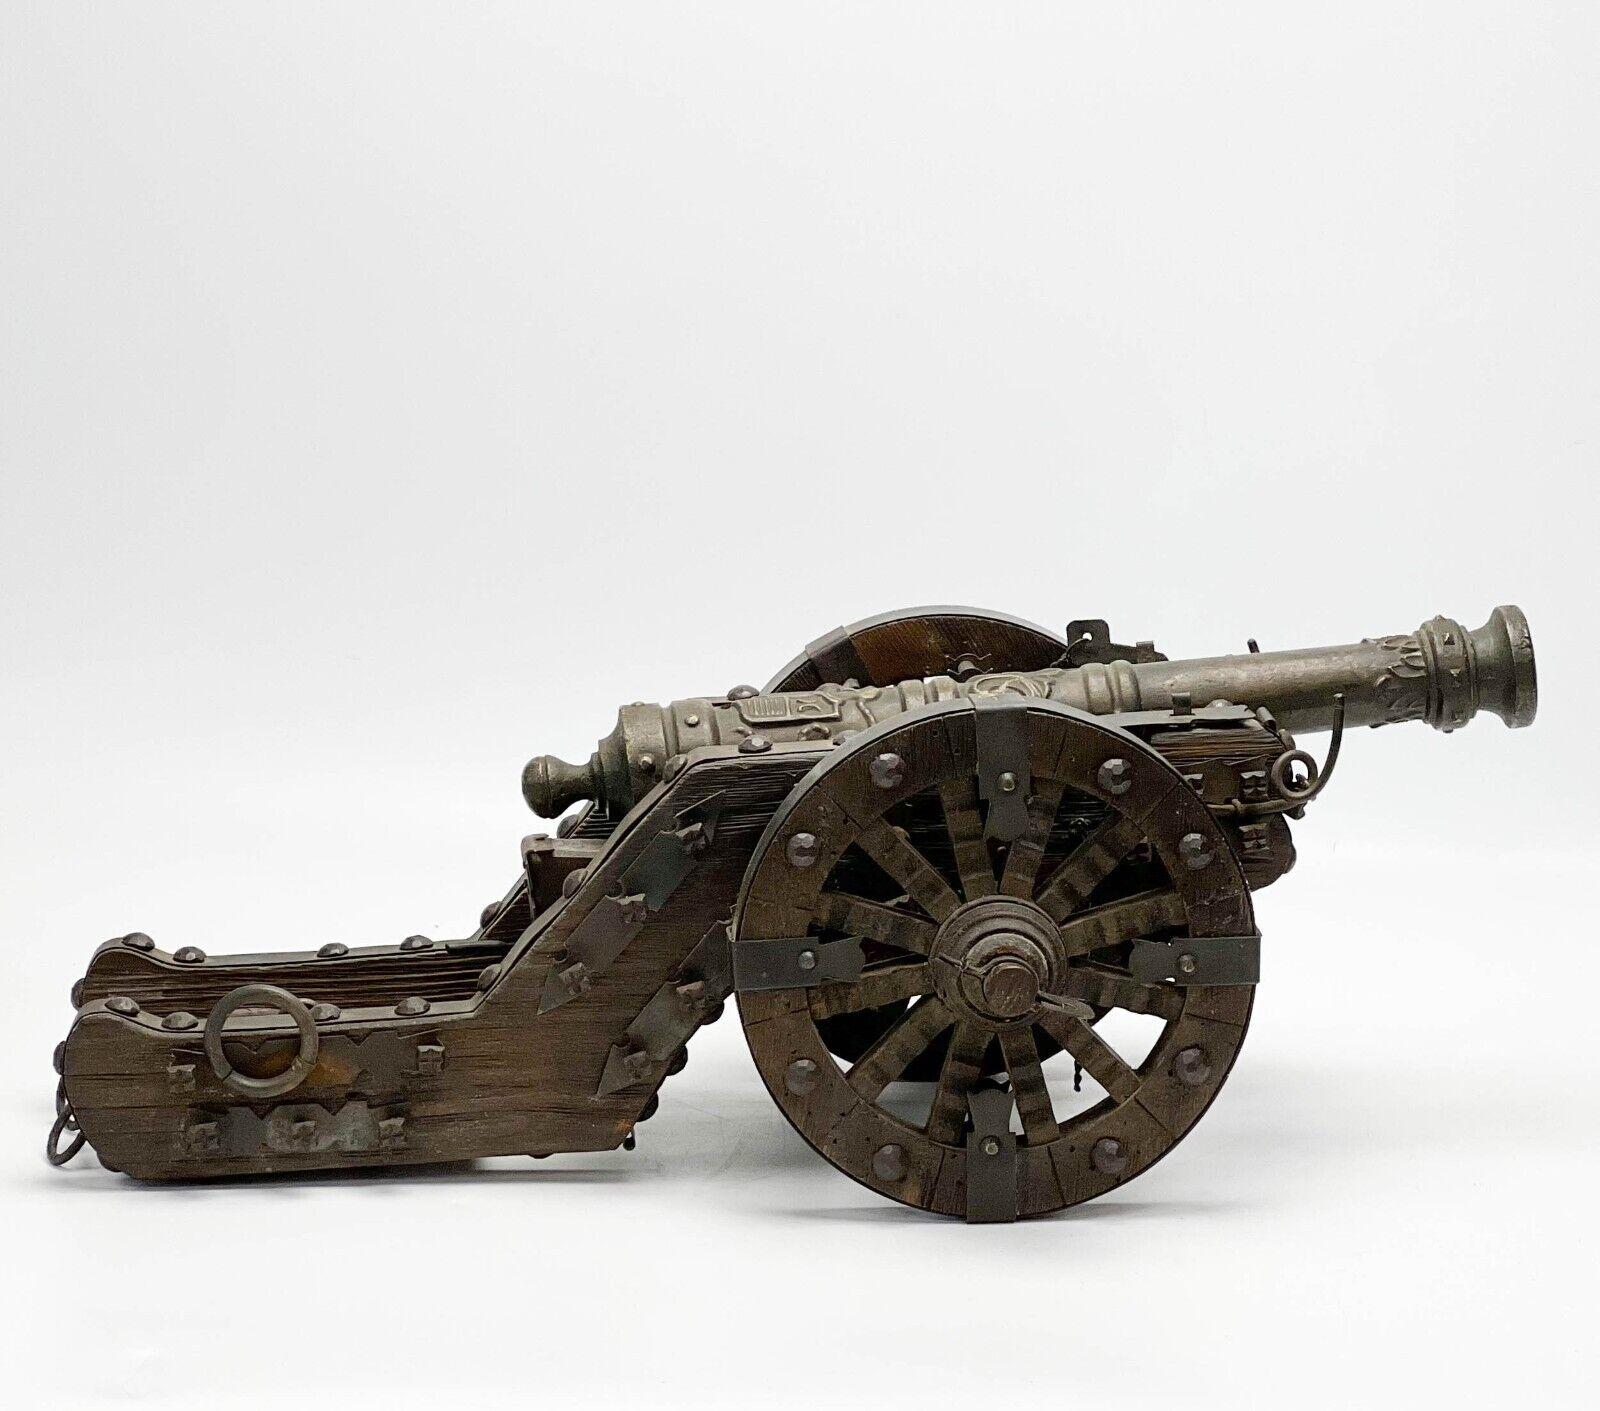 European Wood Iron and Metal Model Cannon with Coat of Arms

Vintage European wood, iron, and metal model cannon. Ornate decoration to cannon featuring a coat of arms. The base the back end of cannon sits on can be adjusted by turning the lever.